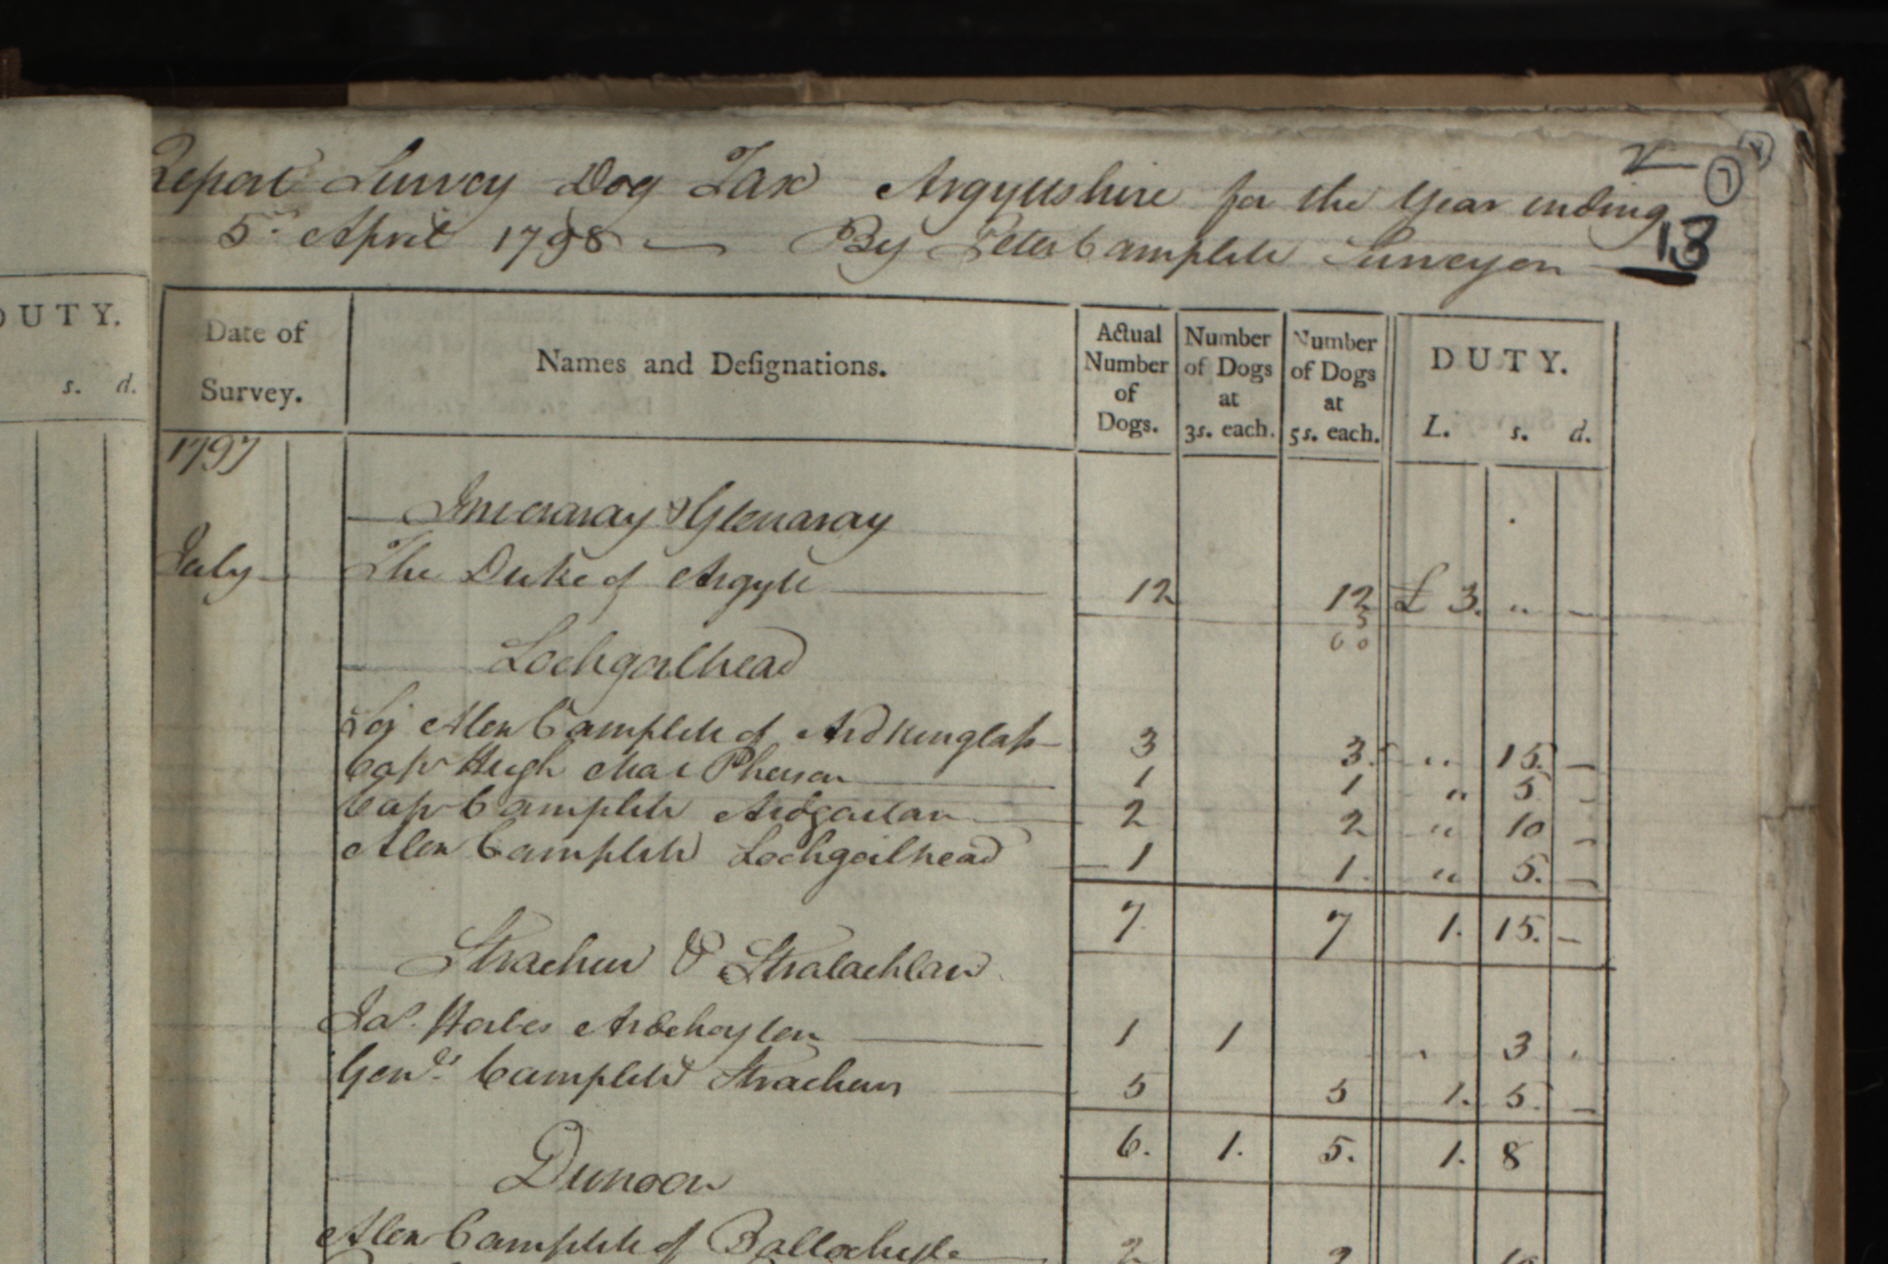 An old page from the Survey Dog Tax record